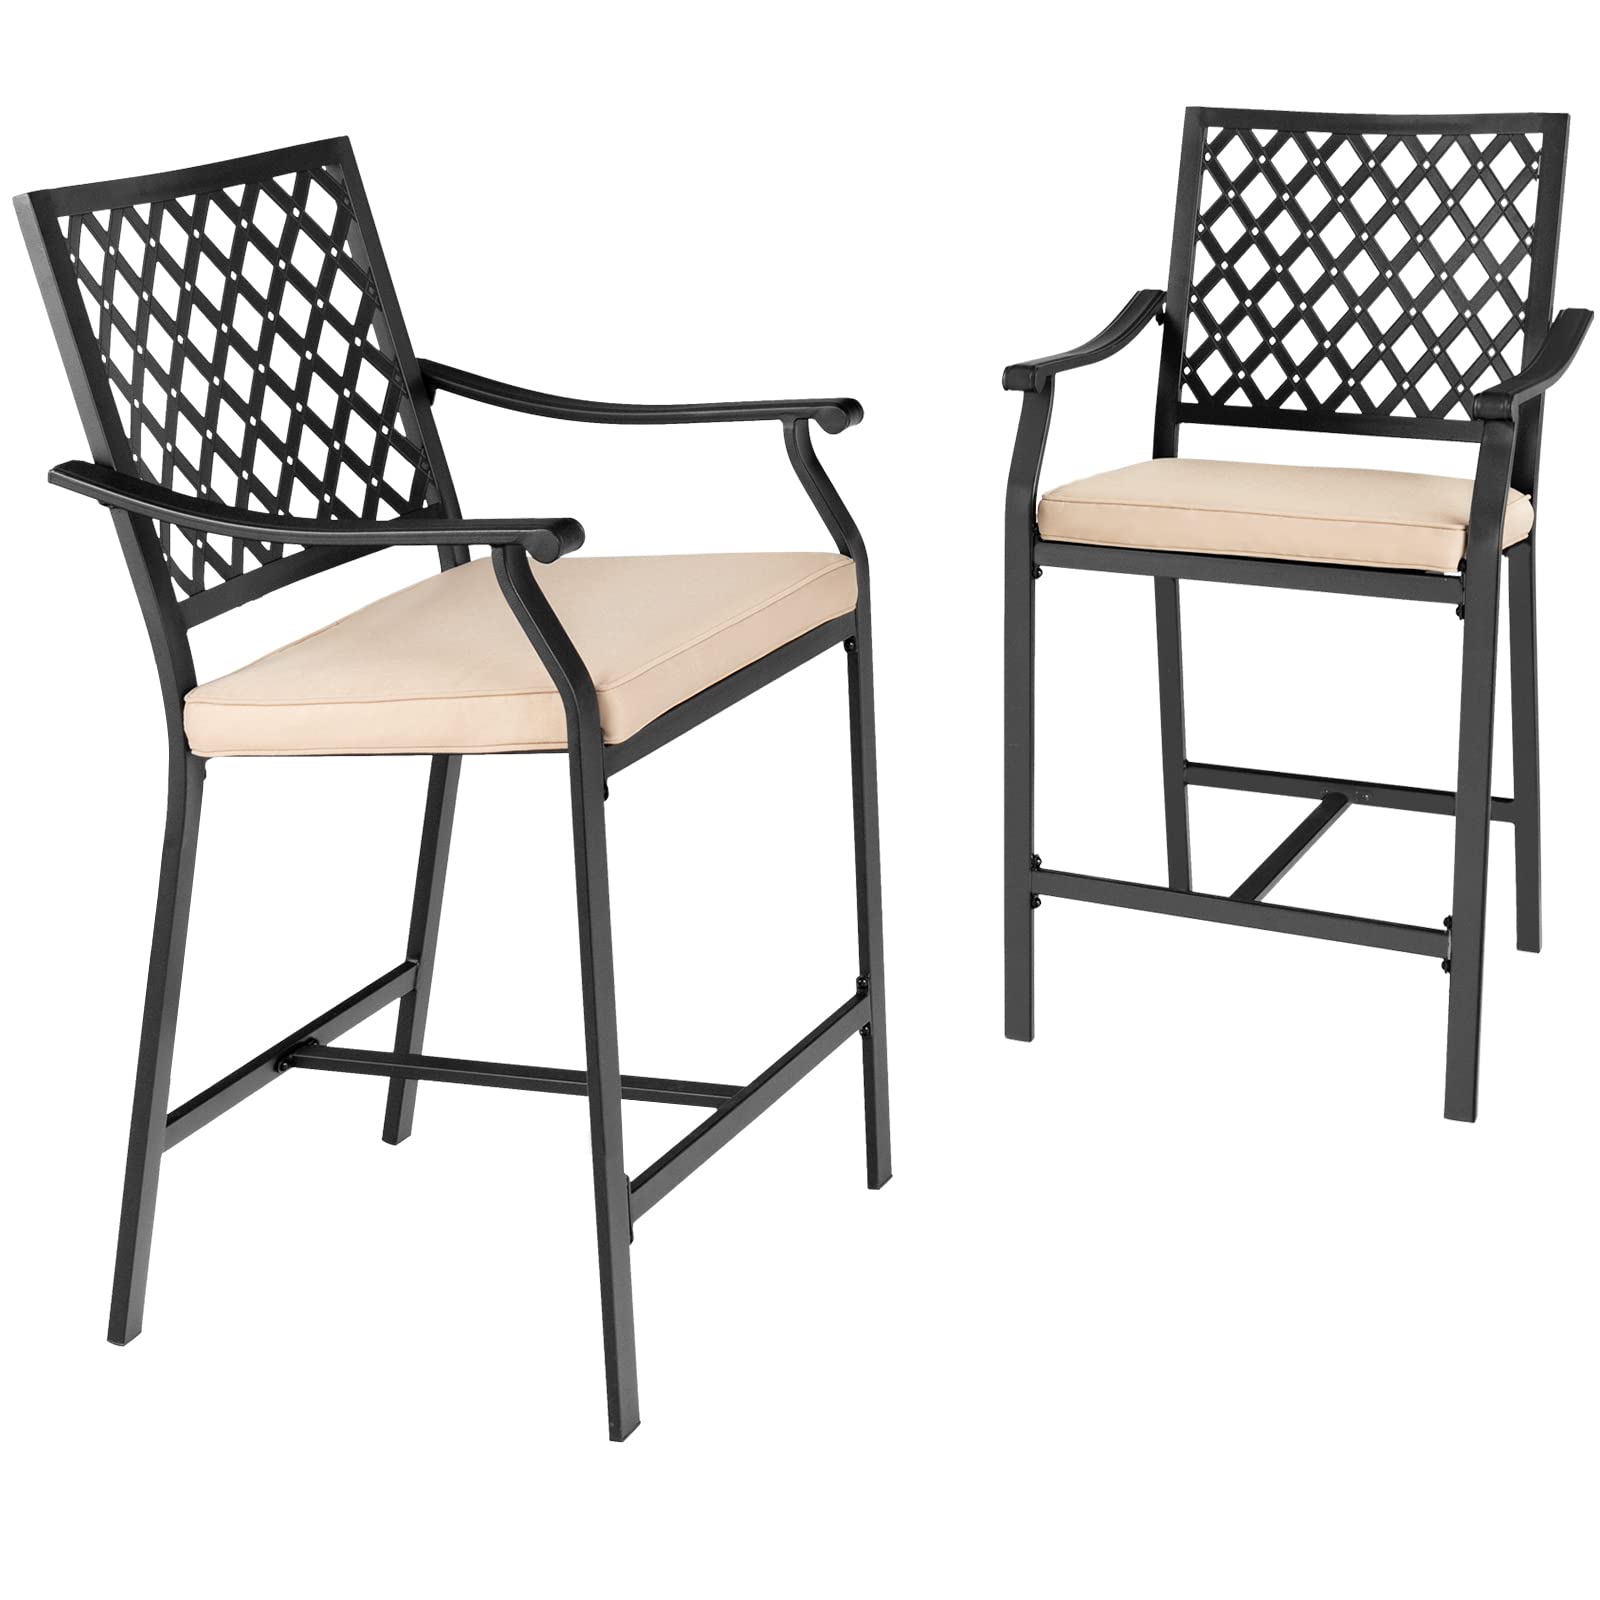 Set of 2 or 4 Patio Bar Chairs Outdoor High Chairs with Cushion Metal Bistro Stool